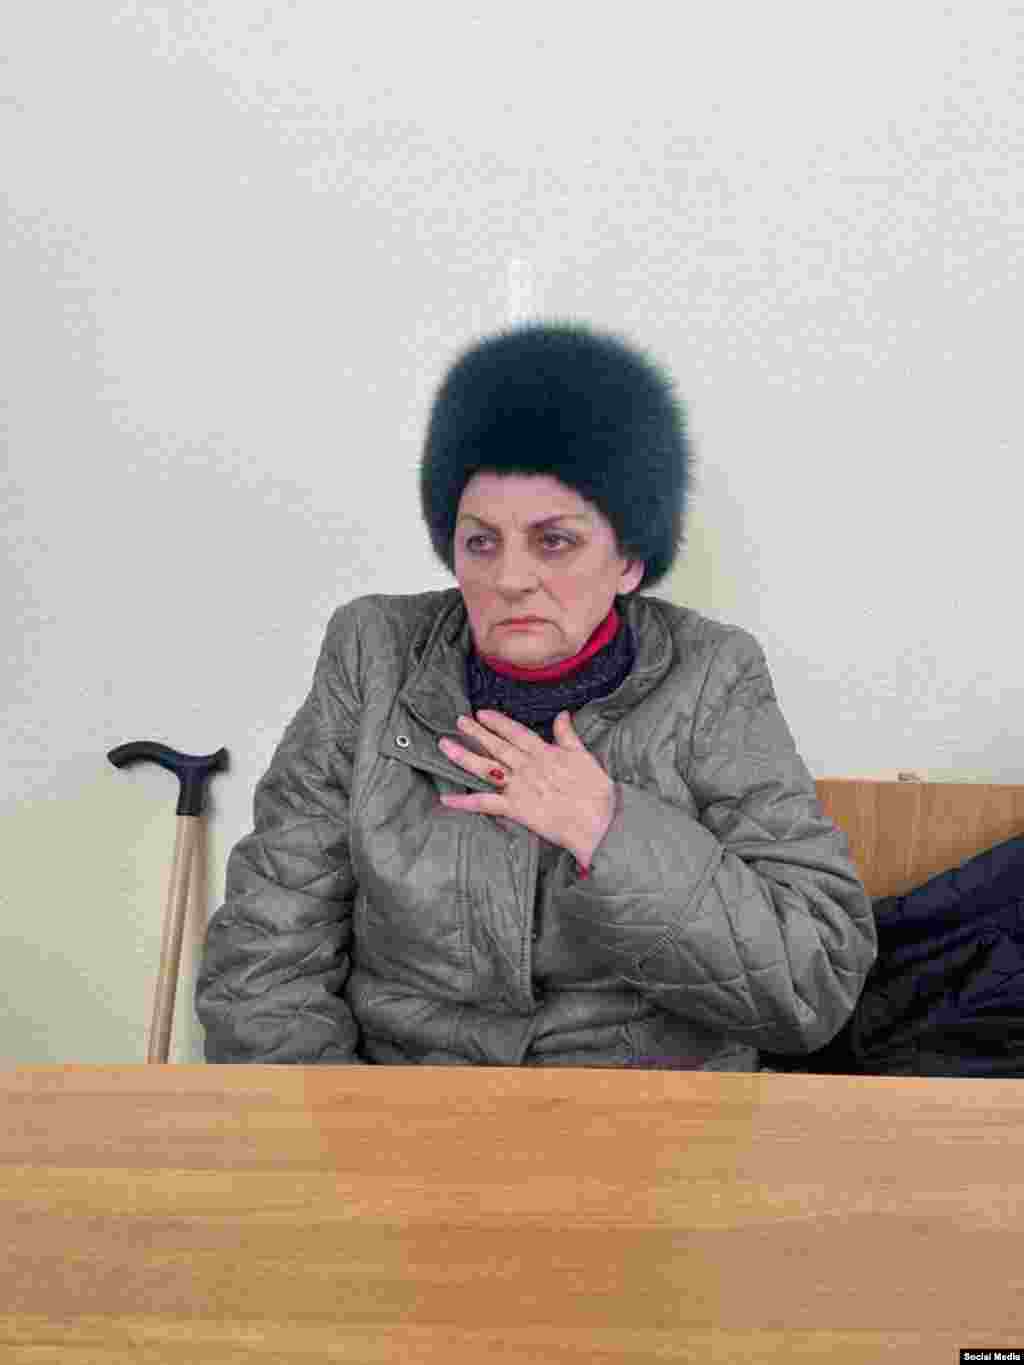 Yevgenia Maiboroda The 72-year old, who lives on the outskirts of a mining town in the Rostov region, was sentenced to 5 1/2 years in prison for spreading &ldquo;false&rdquo; information about Russia&rsquo;s army. One of her offending posts on the Russian social media app VK highlighted the tens of thousands of civilian deaths during the Russian takeover of Mariupol. &nbsp; The pensioner&rsquo;s life was marked by tragedy before her imprisonment. Maiboroda lost her son in a car accident in 1997, and her husband died from an illness in 2011. Amid the invasion of Ukraine, Maiboroda&rsquo;s cousin, living across the border in Ukraine, was wounded in a Russian strike on Dnipro.